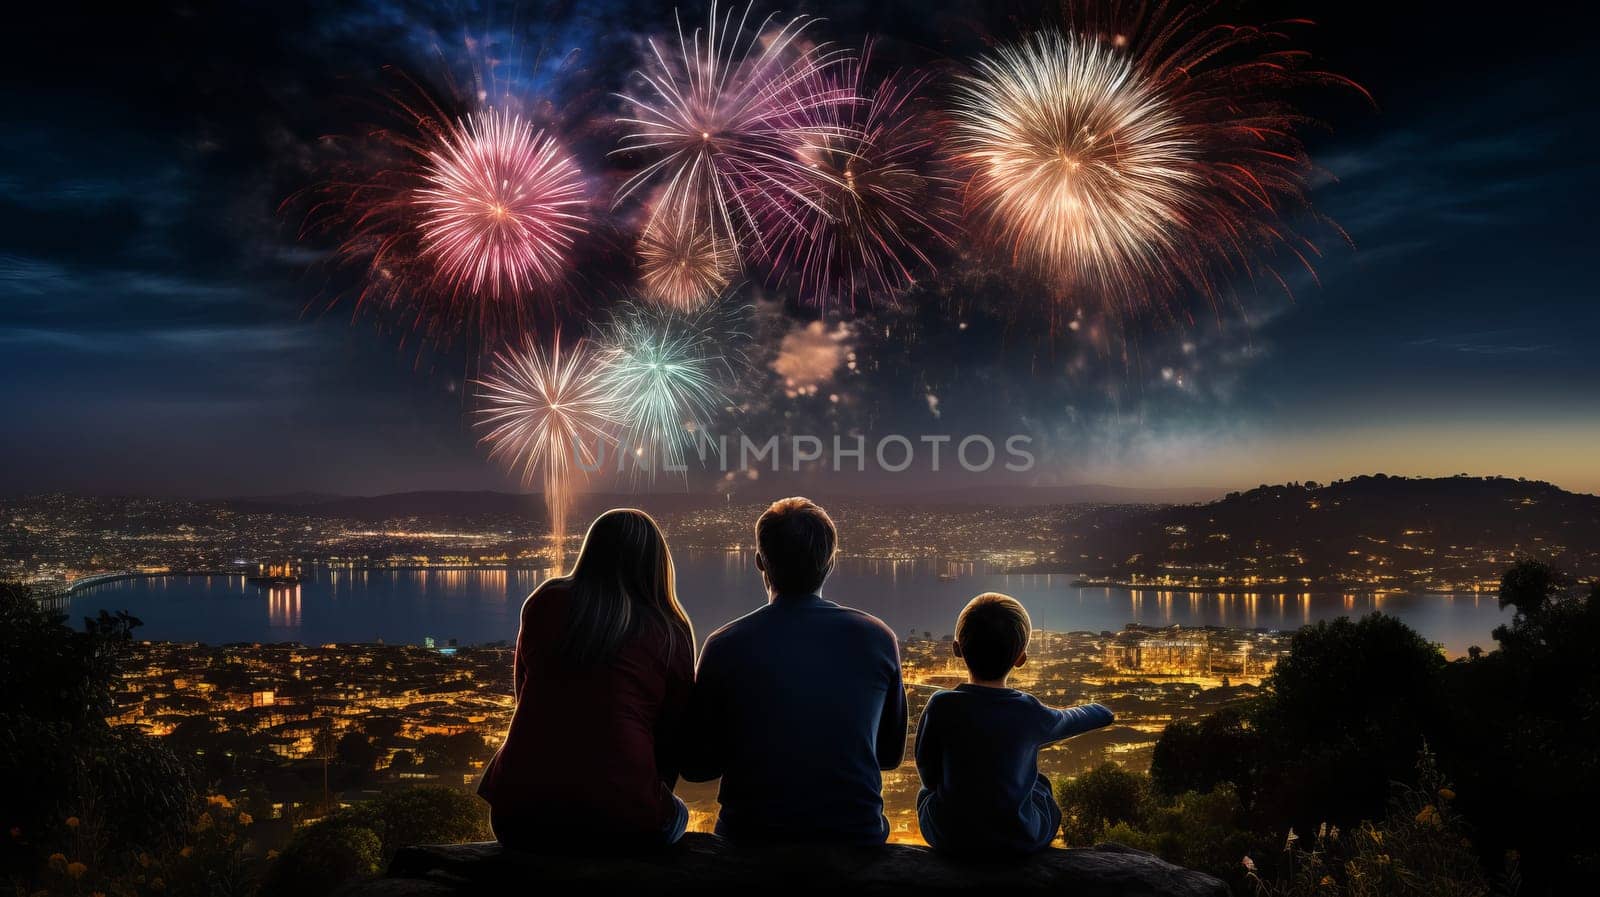 Couple watching fireworks on a cliff Experience a romantic and scenic view of a city at night with fireworks in the sky with this photo of a couple sitting on a cliff. by DogDrawHand